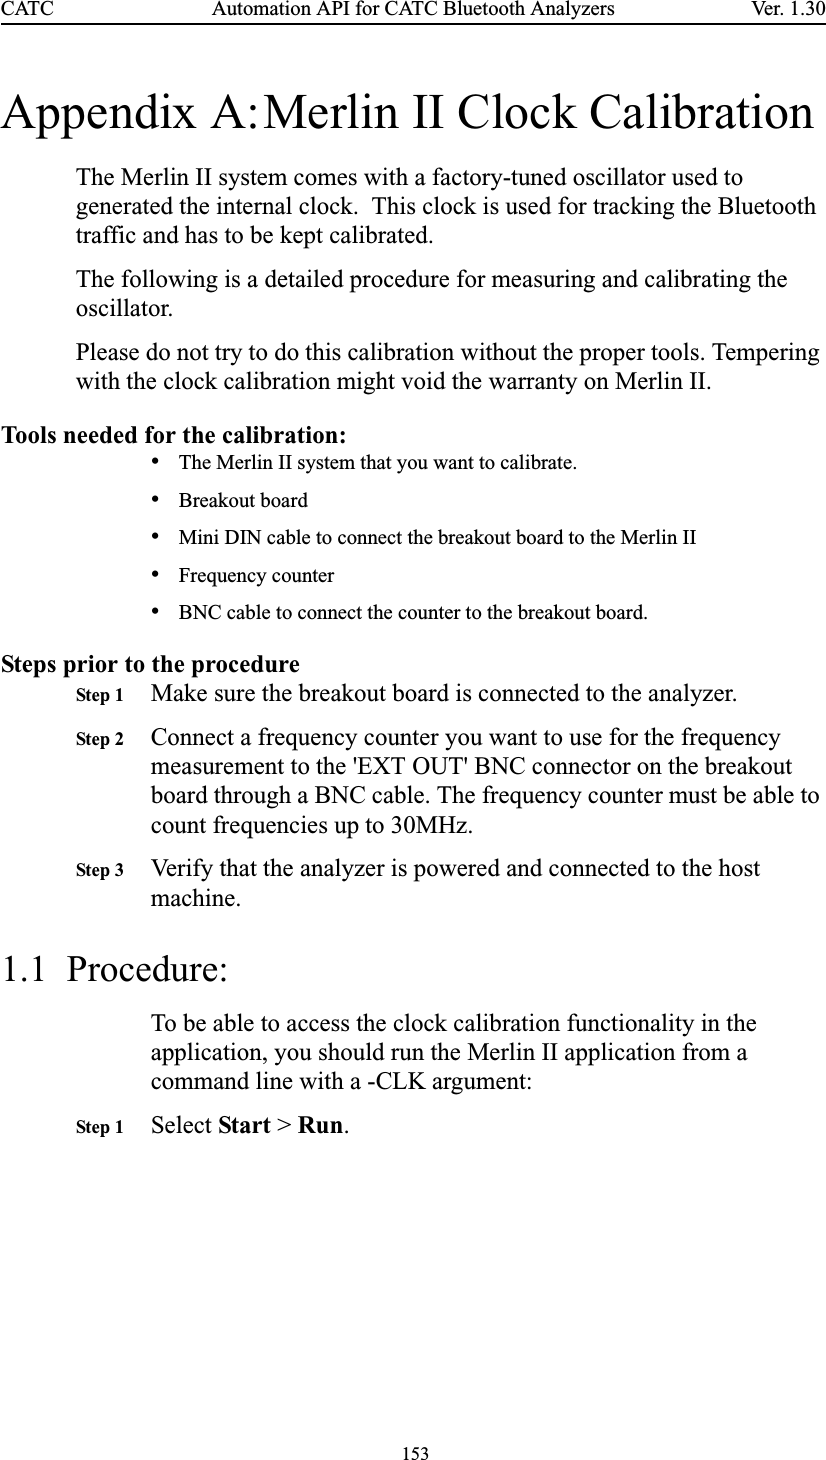  153Automation API for CATC Bluetooth AnalyzersCATC Ve r. 1.3 0Appendix A:Merlin II Clock CalibrationThe Merlin II system comes with a factory-tuned oscillator used to generated the internal clock.  This clock is used for tracking the Bluetooth traffic and has to be kept calibrated.The following is a detailed procedure for measuring and calibrating the oscillator. Please do not try to do this calibration without the proper tools. Tempering with the clock calibration might void the warranty on Merlin II. Tools needed for the calibration:•The Merlin II system that you want to calibrate.•Breakout board•Mini DIN cable to connect the breakout board to the Merlin II•Frequency counter•BNC cable to connect the counter to the breakout board.Steps prior to the procedureStep 1 Make sure the breakout board is connected to the analyzer.Step 2 Connect a frequency counter you want to use for the frequency measurement to the &apos;EXT OUT&apos; BNC connector on the breakout board through a BNC cable. The frequency counter must be able to count frequencies up to 30MHz.Step 3 Verify that the analyzer is powered and connected to the host machine.1.1  Procedure:To be able to access the clock calibration functionality in the application, you should run the Merlin II application from a command line with a -CLK argument:Step 1 Select Start &gt; Run.